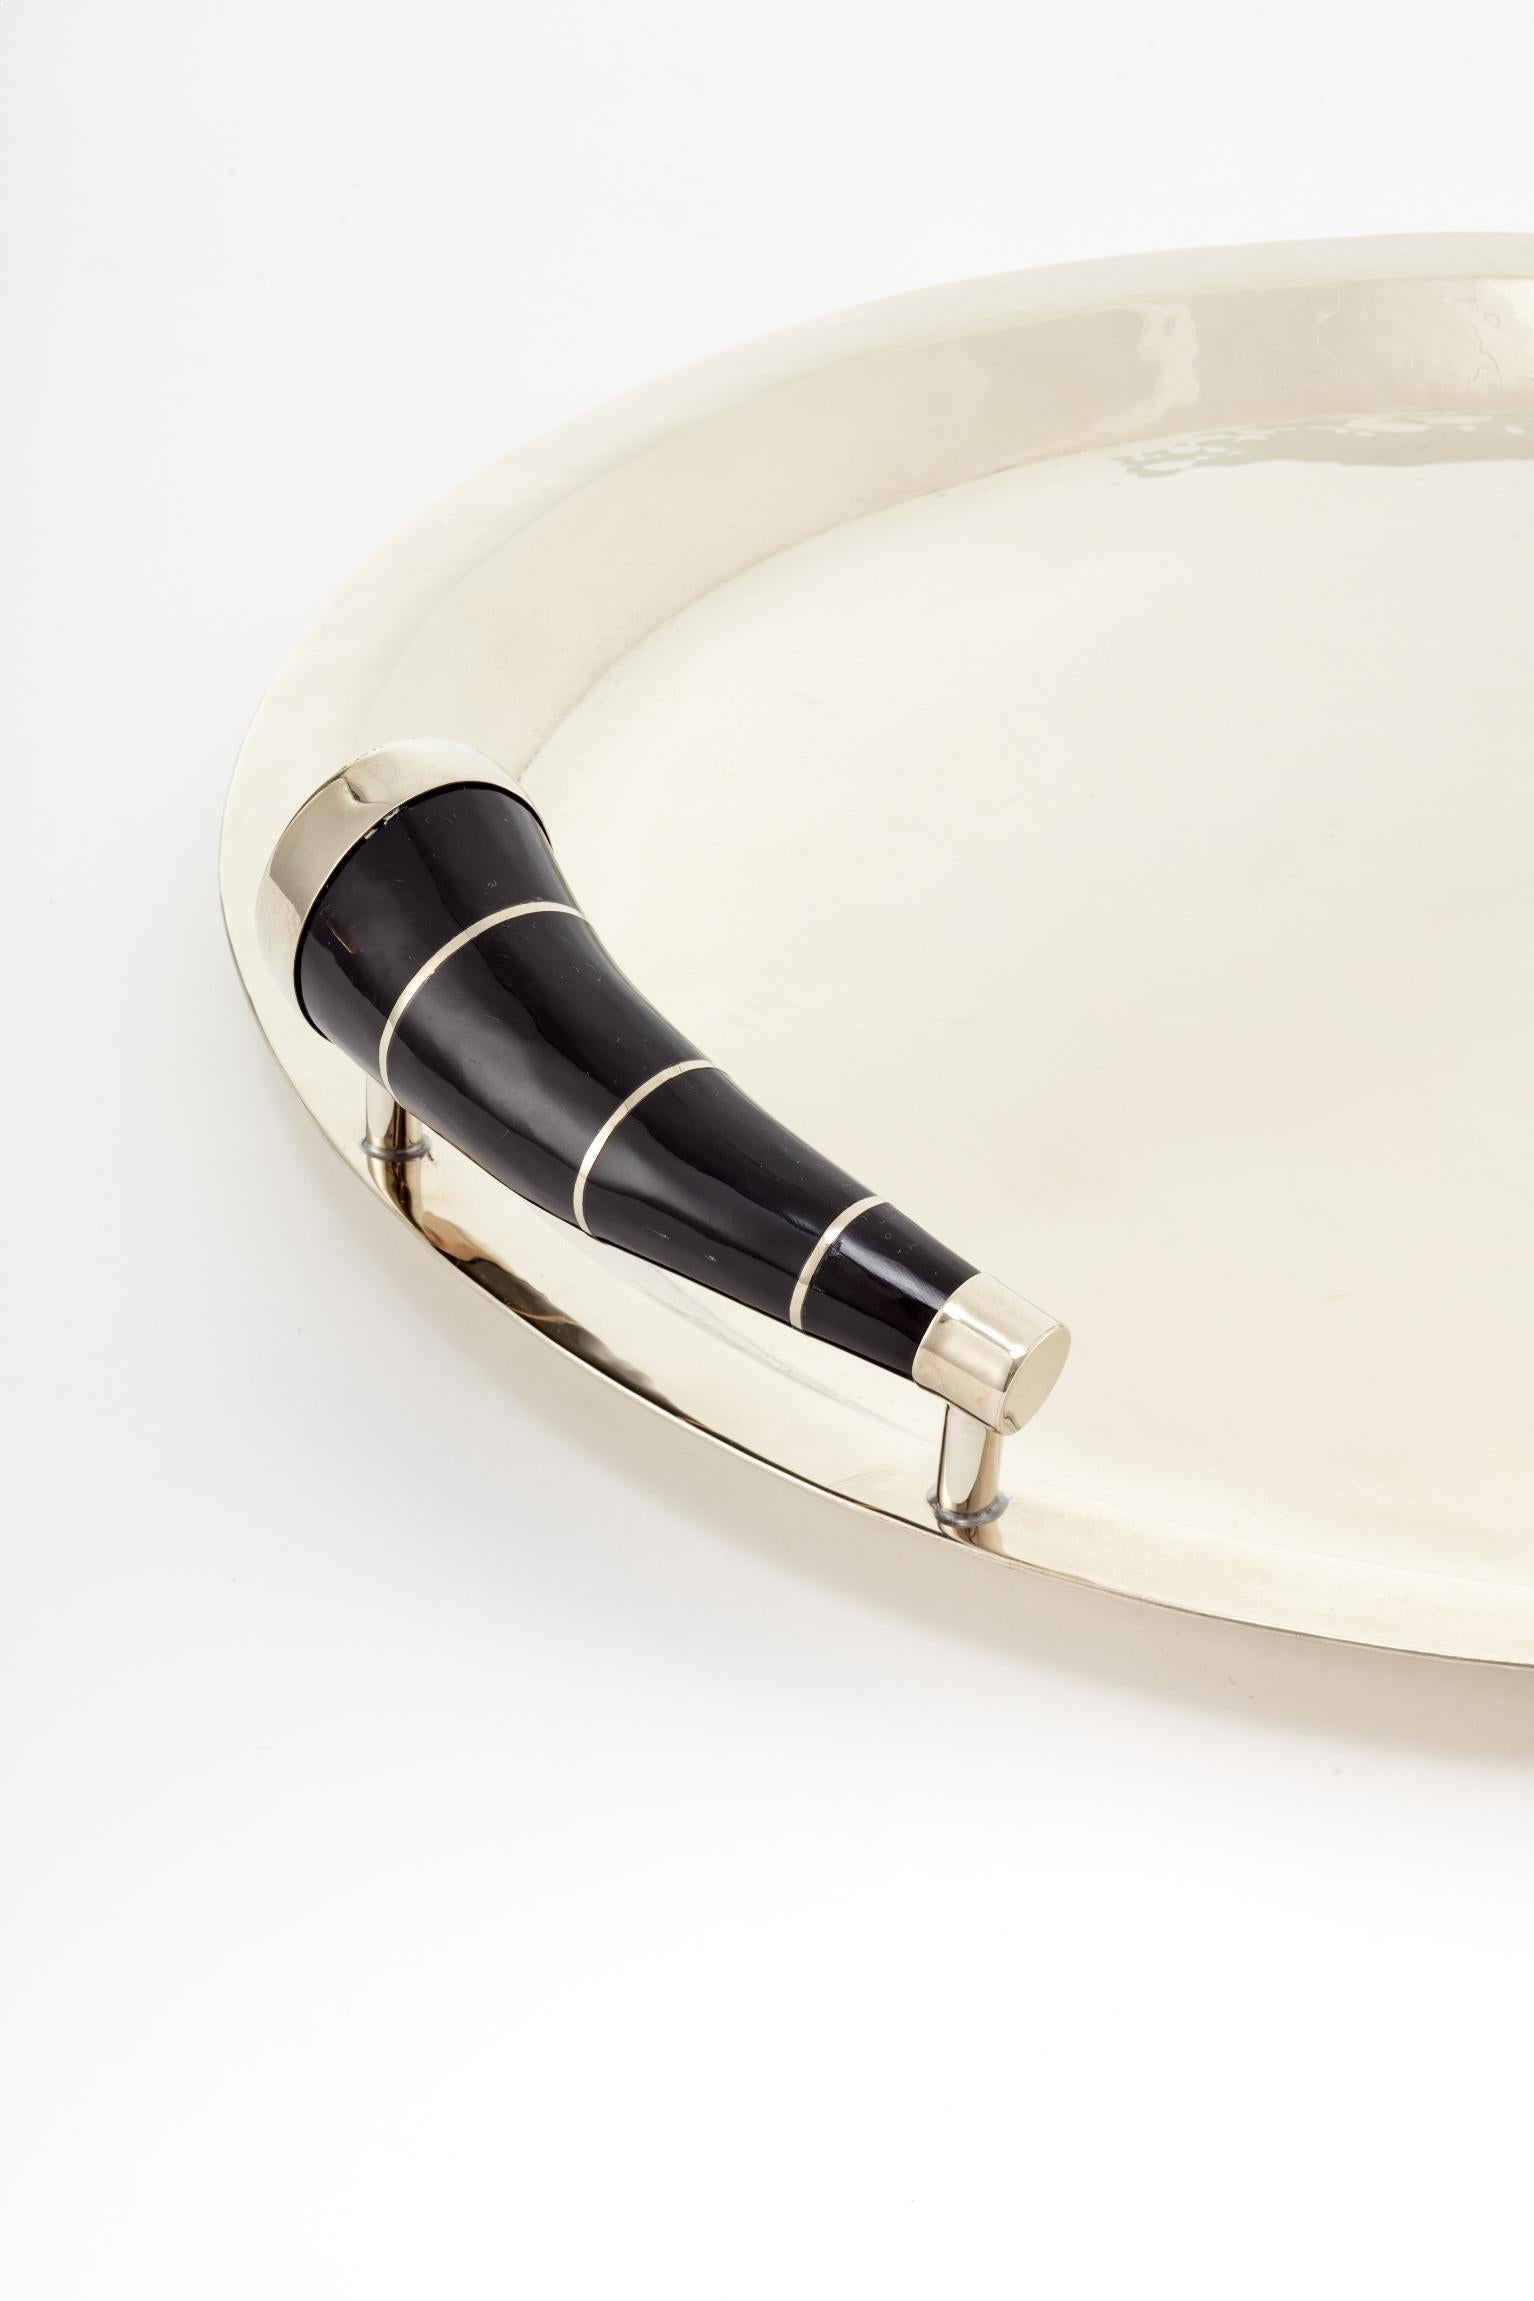 Organic Modern Chubut Small Round Tray, Alpaca Silver & Black Horn For Sale